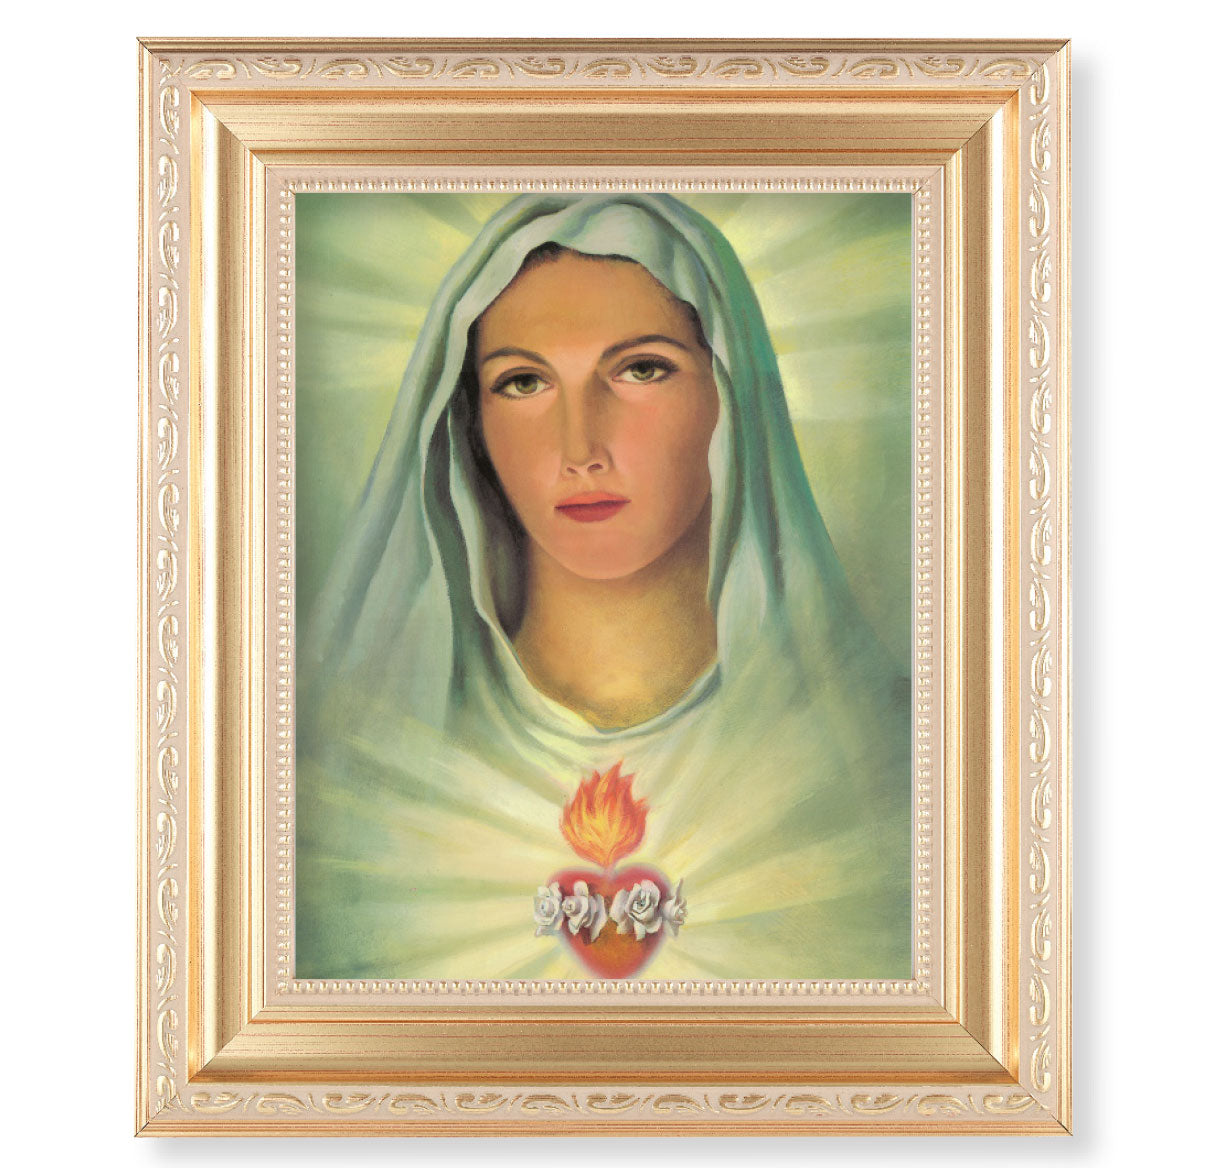 Immaculate Heart of Mary Picture Framed Wall Art Decor, Large, Satin Gold Fluted Frame with Distressed Finish and Fine Detailed Scrollwork